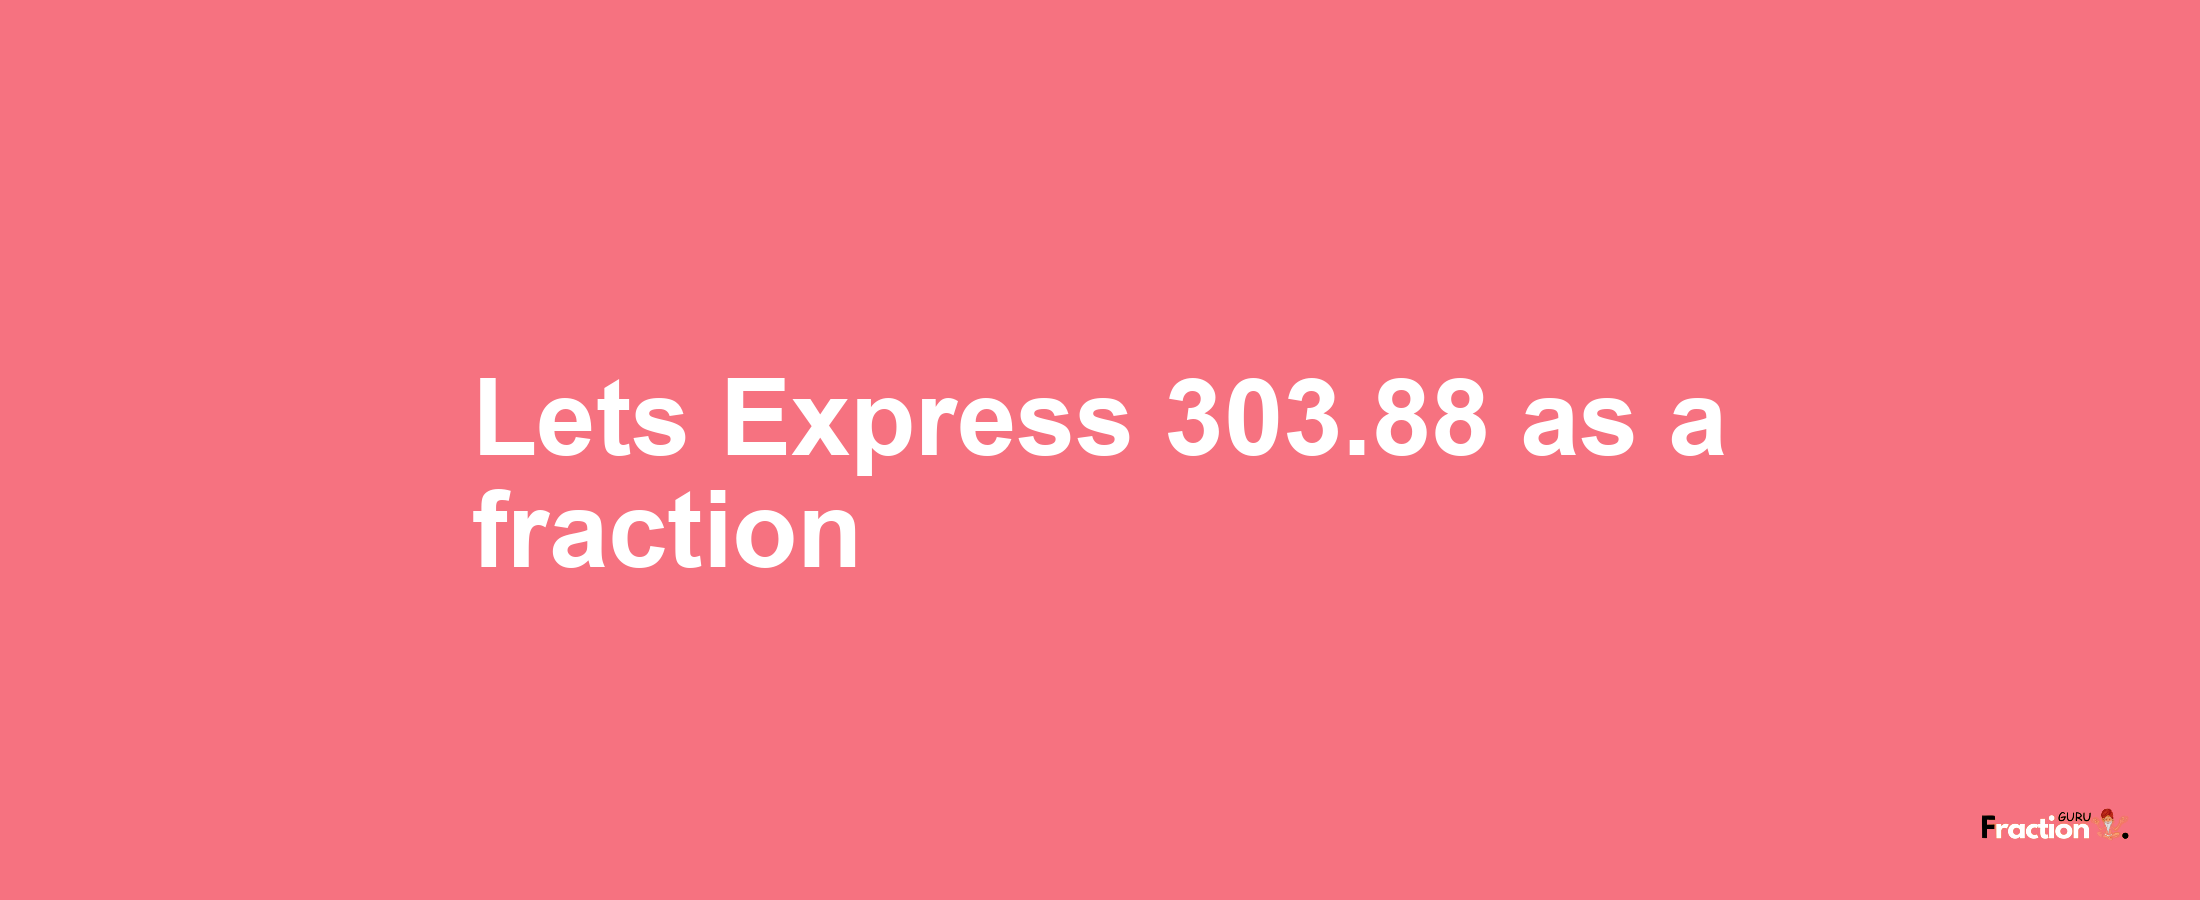 Lets Express 303.88 as afraction